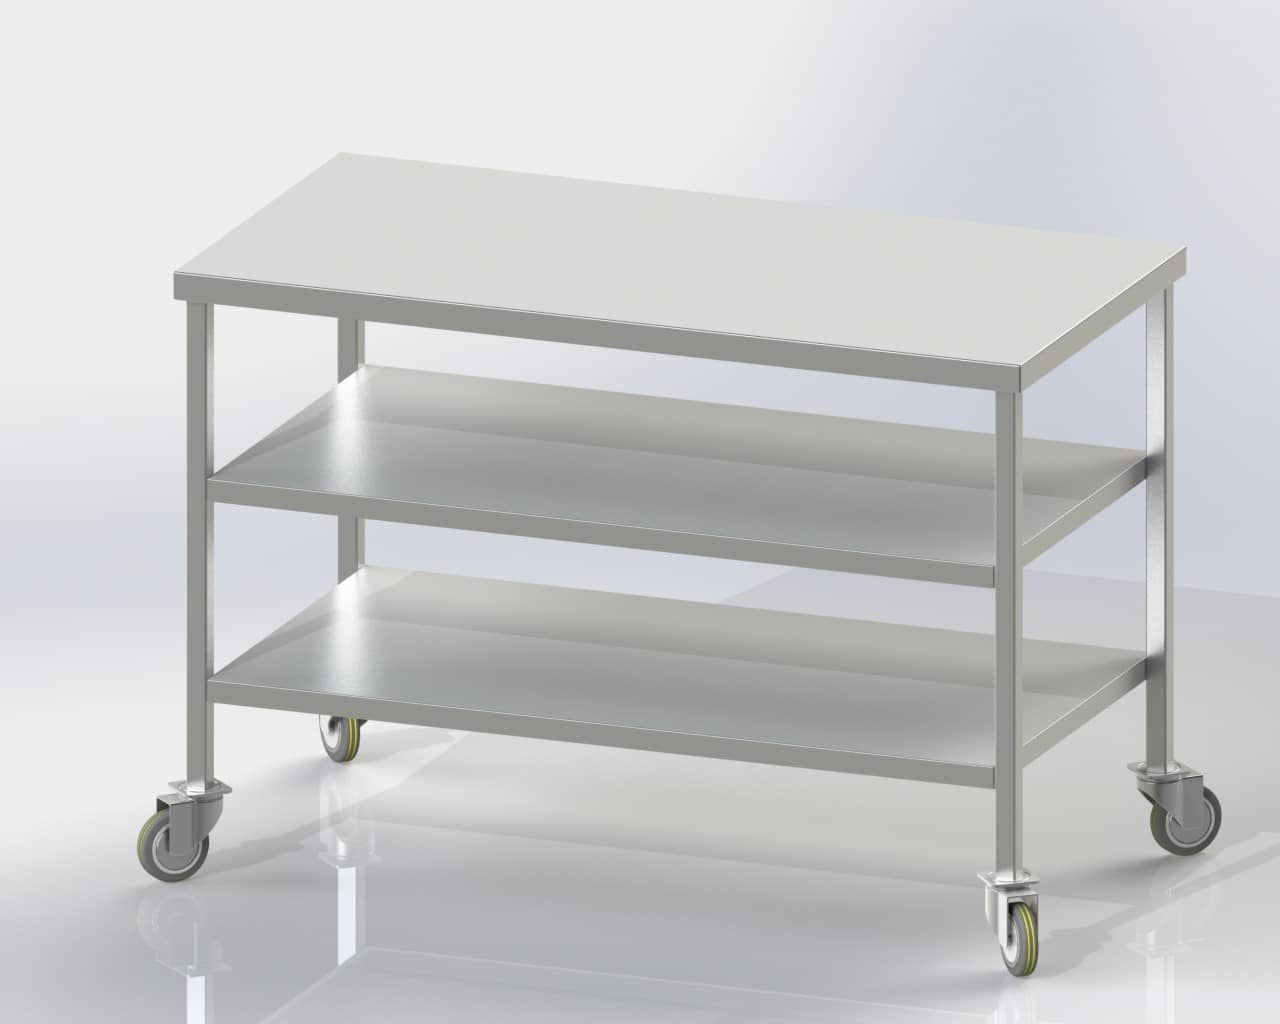 Mobile Table with Lower and Intermediate Shelves